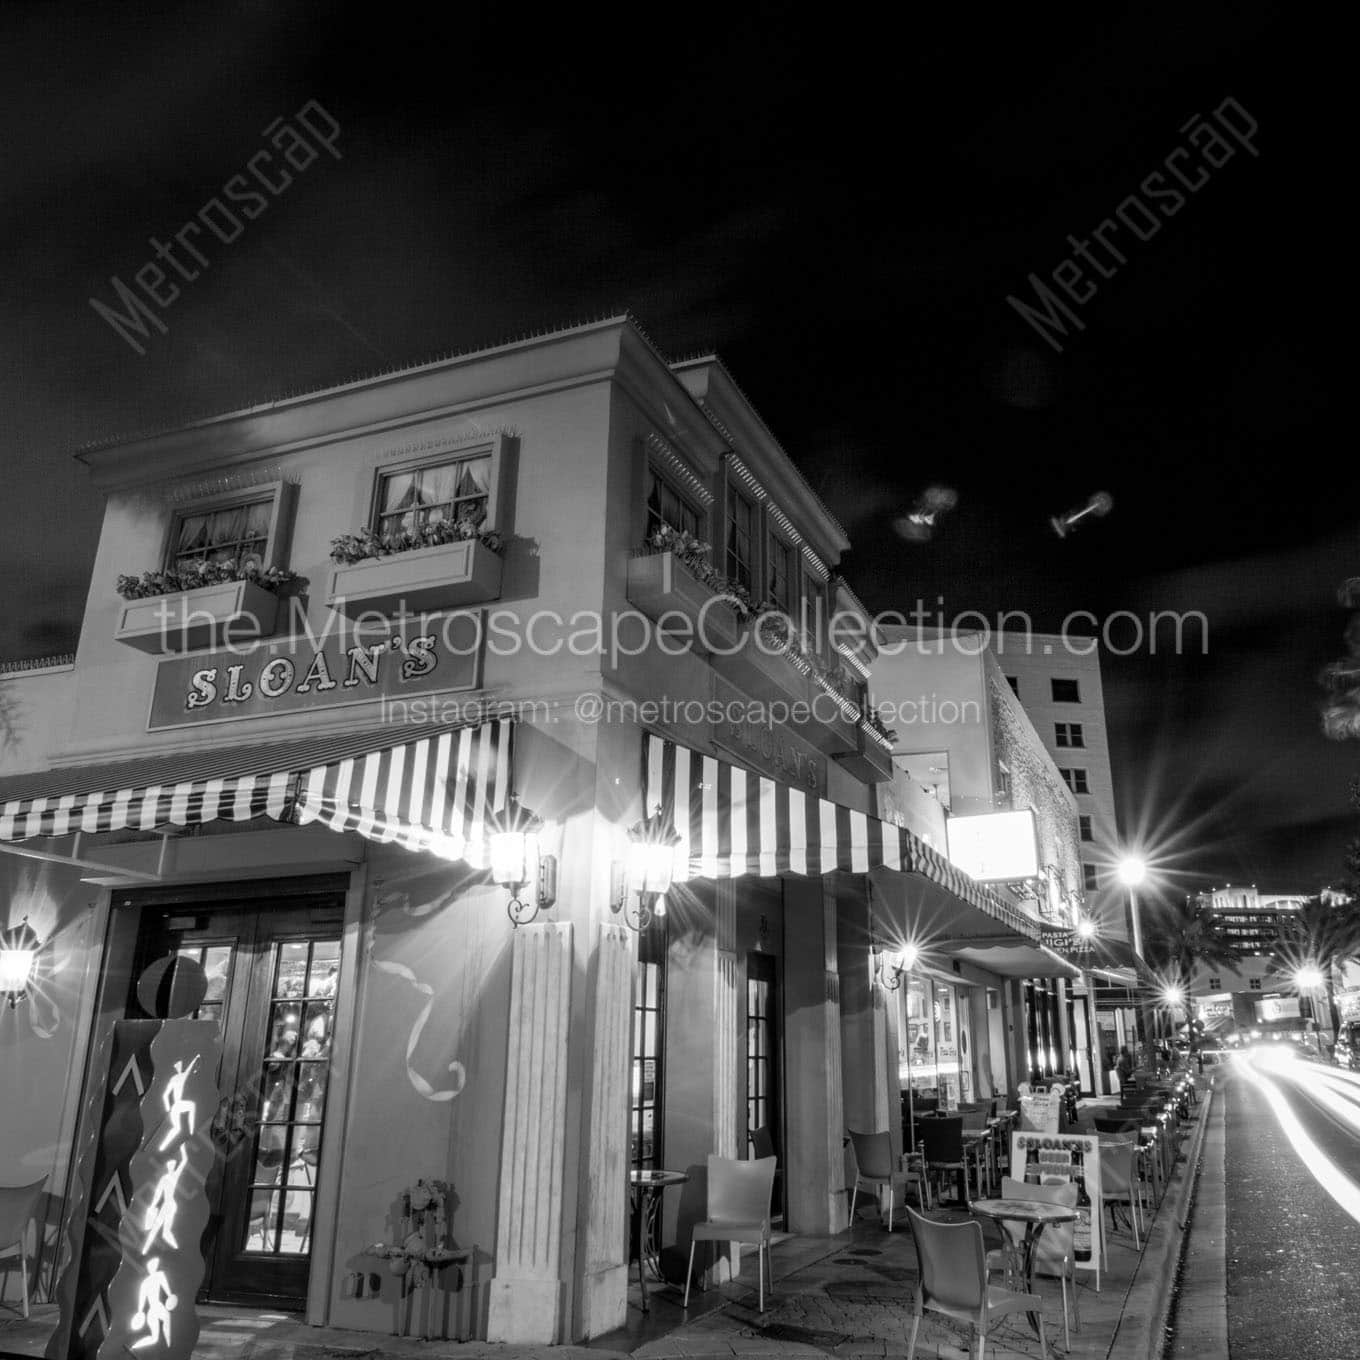 sloans ice cream shop on clematis Black & White Wall Art